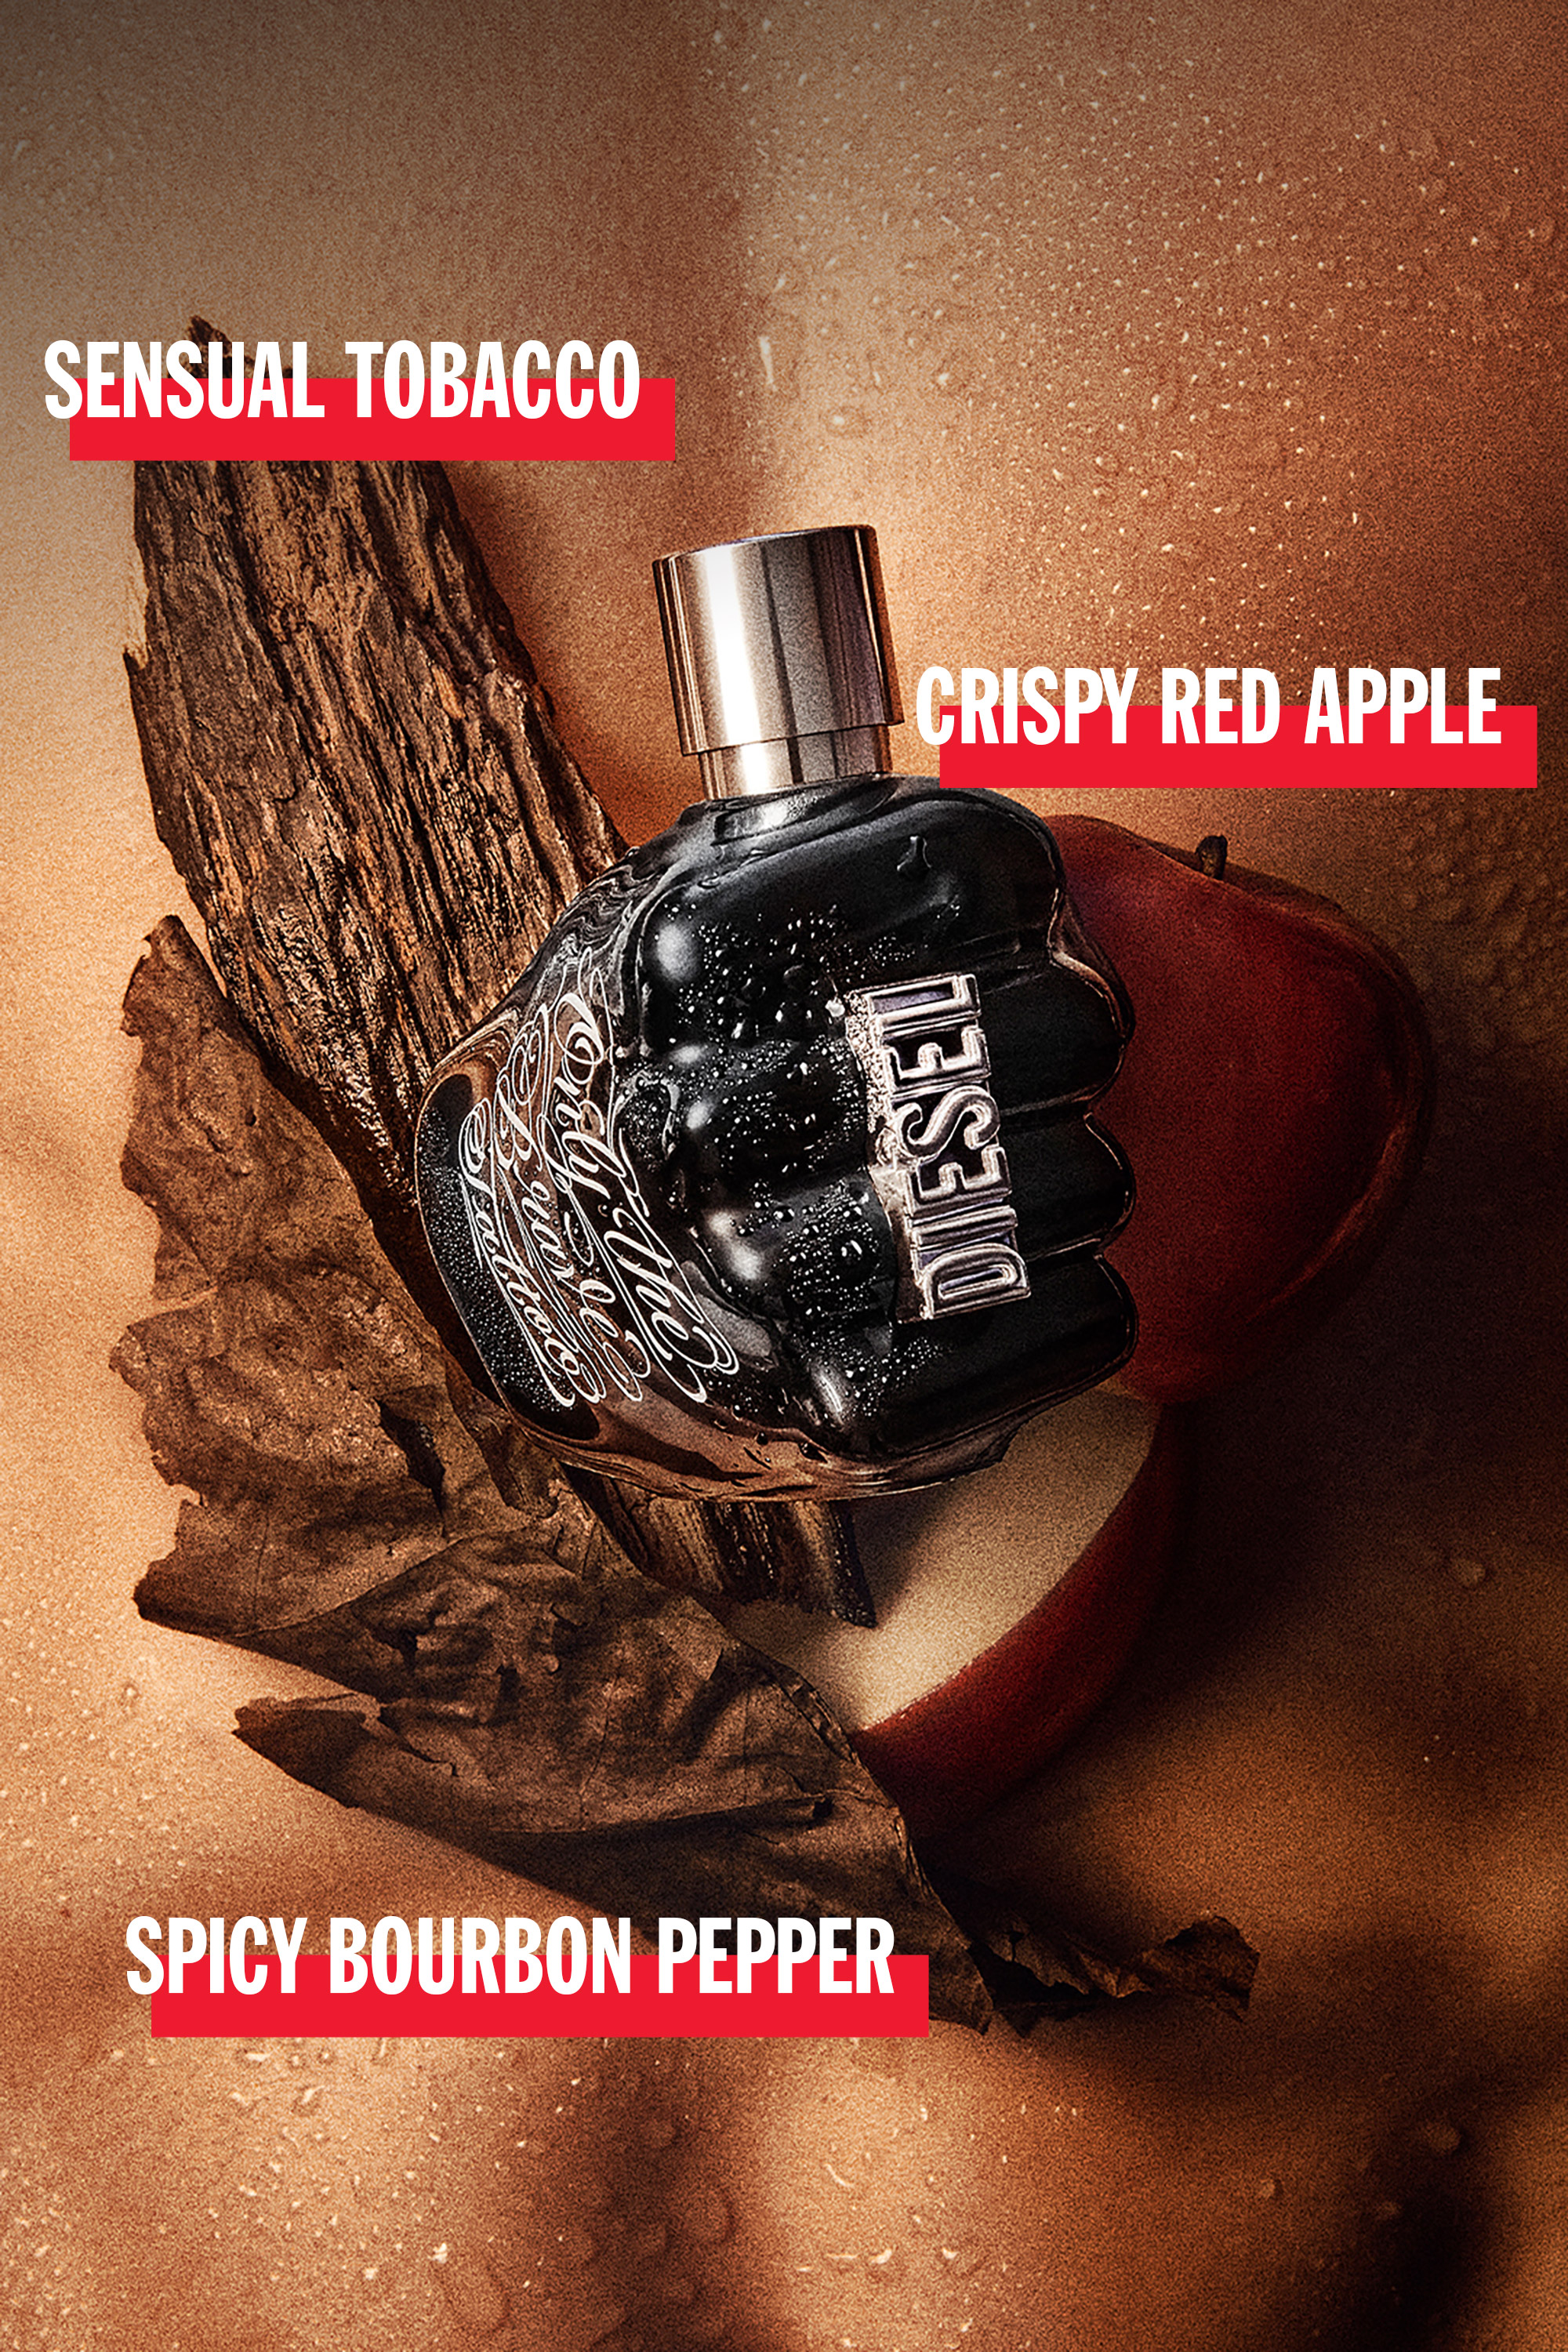 Diesel - ONLY THE BRAVE TATTOO 50 ML, Black - Image 2